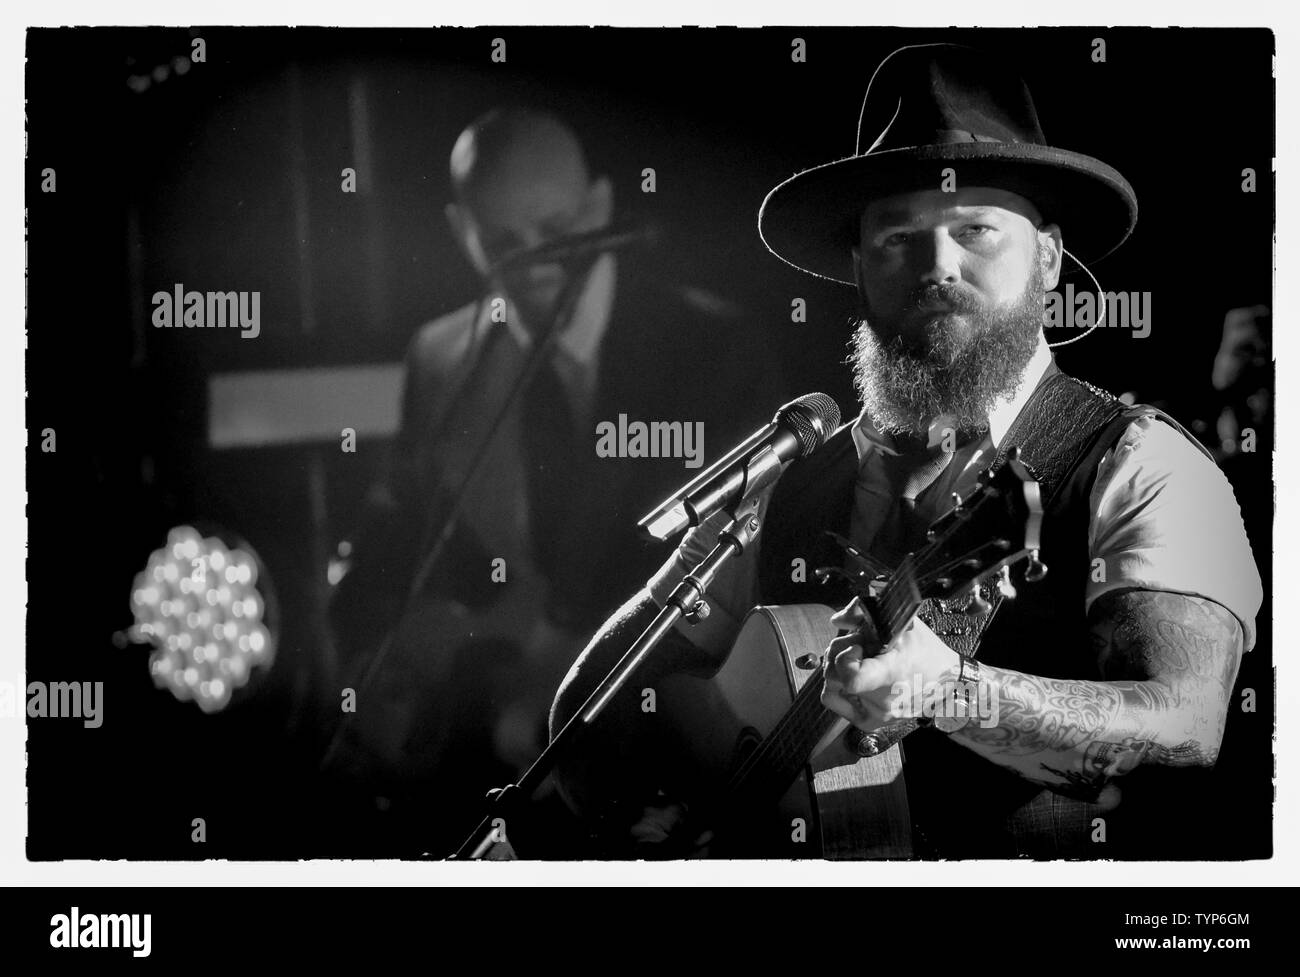 Zac brown Black and White Stock Photos & Images - Alamy